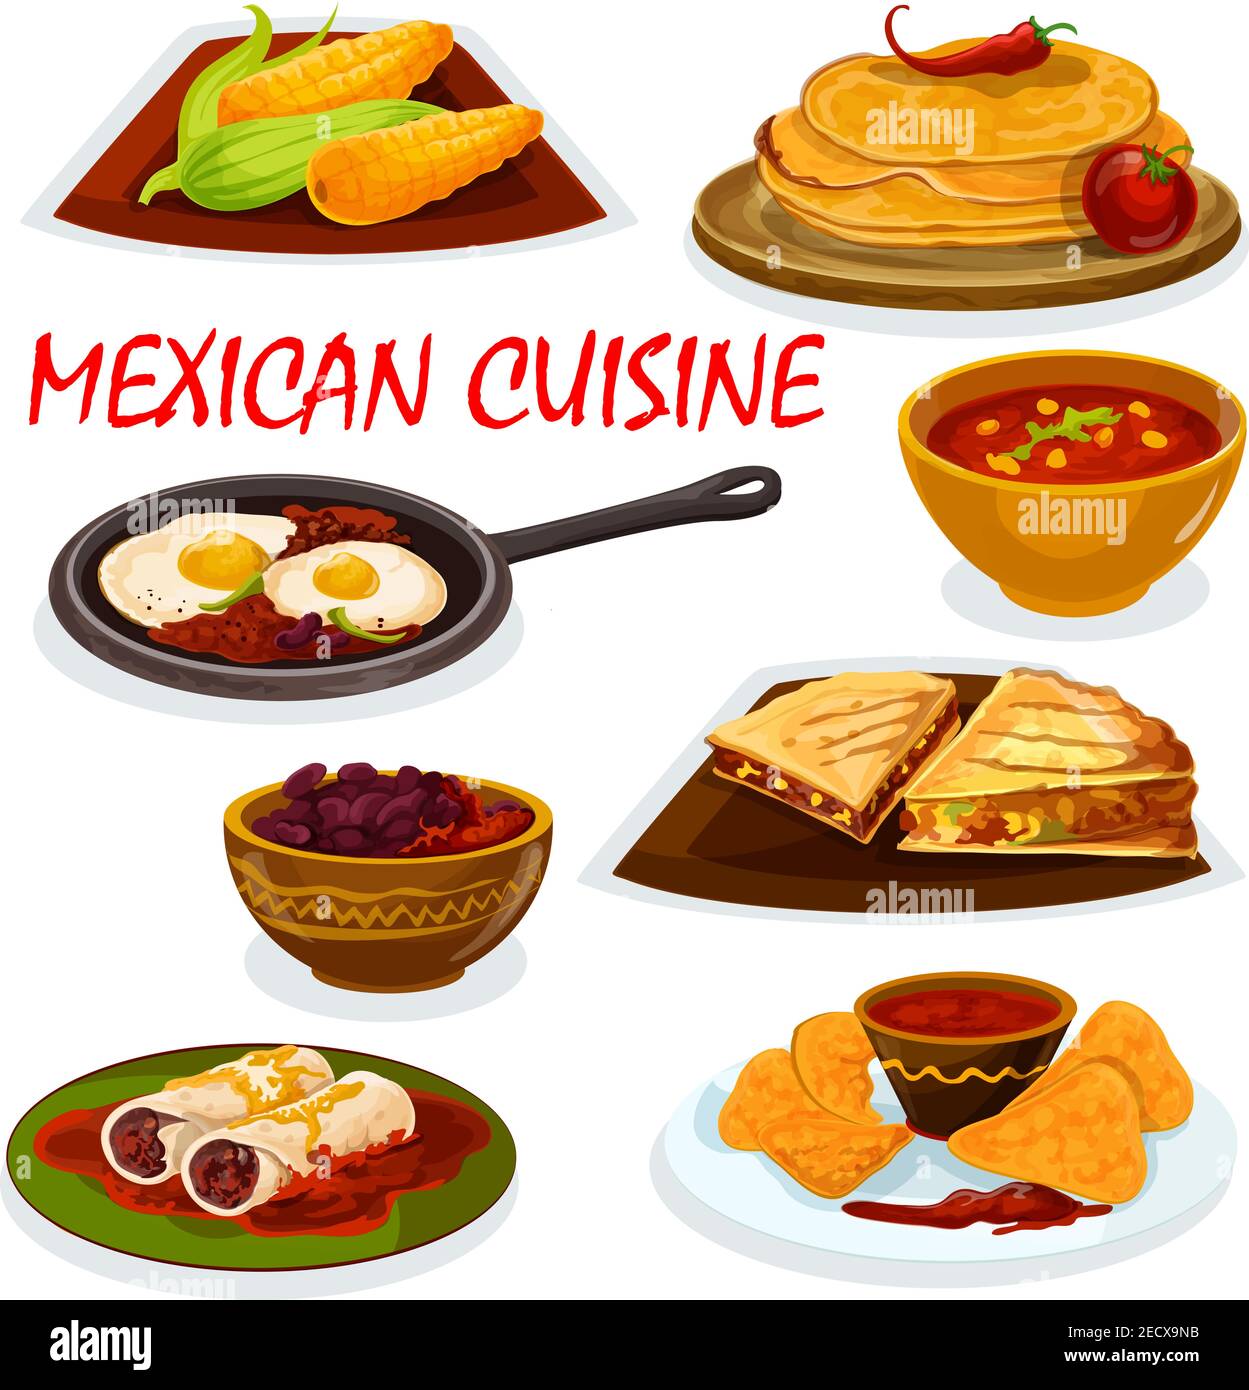 Mexican cuisine burrito, tortillas and nacho icon served with tomato sauce salsa, tortilla beef sandwiches with vegetables, boiled corn cob, chili sou Stock Vector